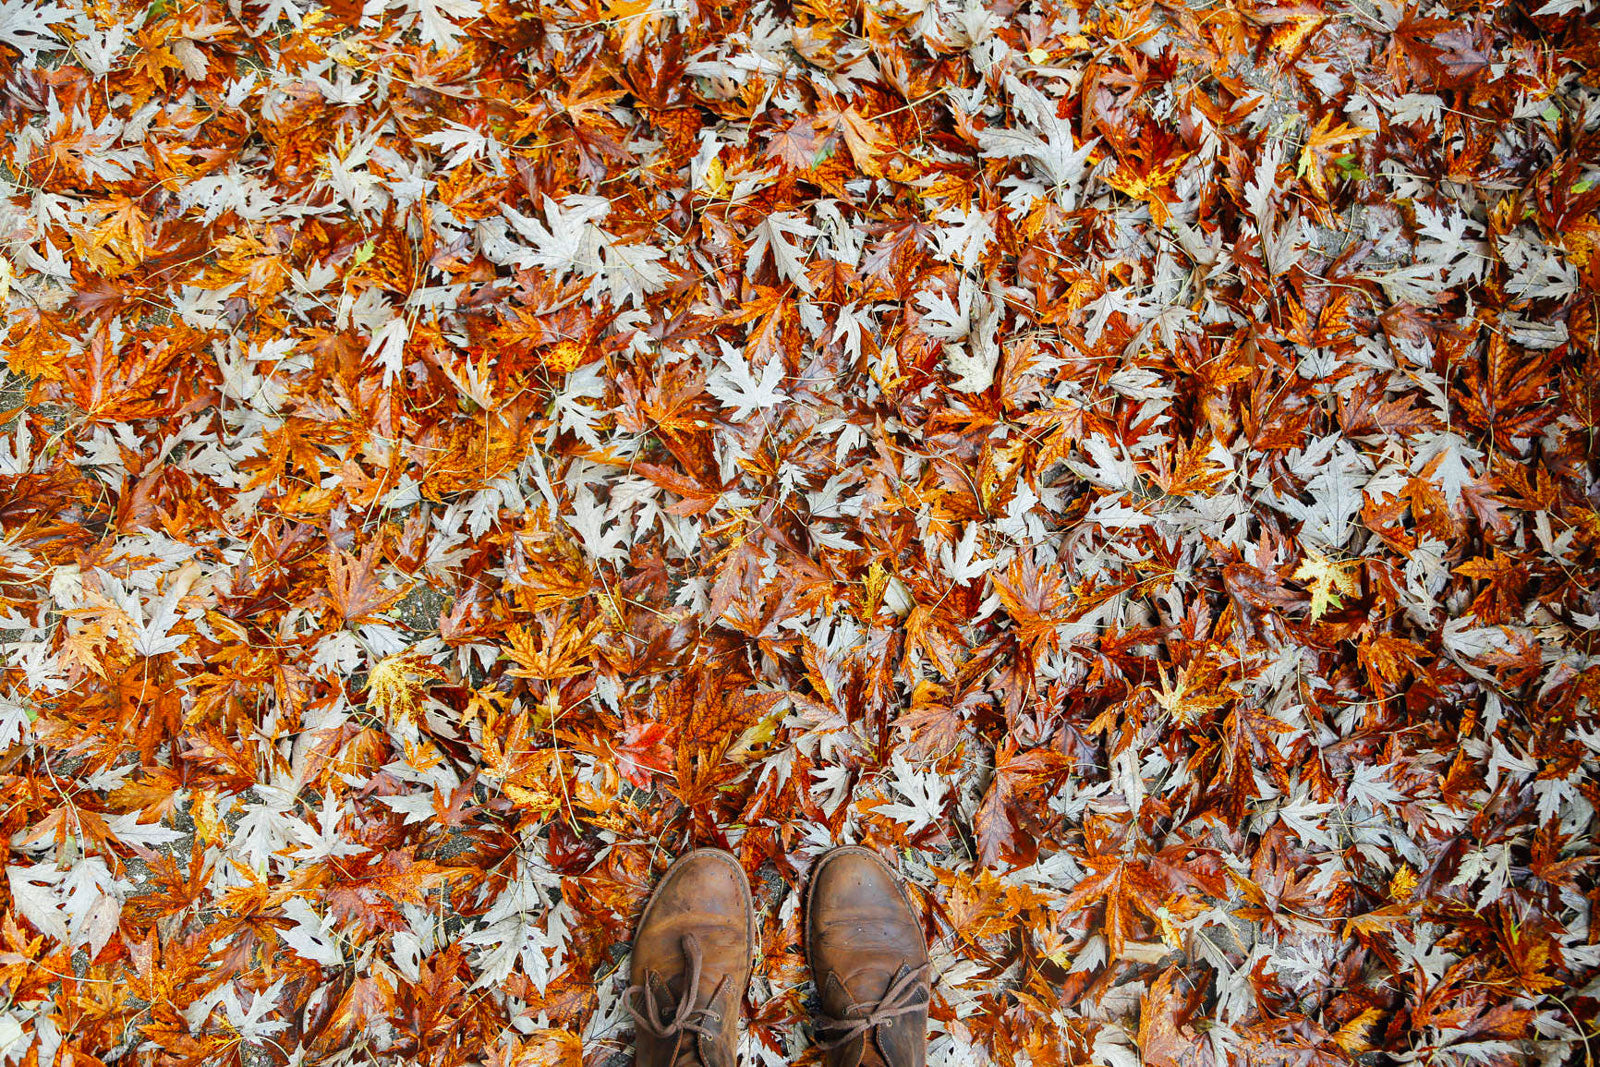 Hiker pov looking down at boots standing in pile of fall leaves.